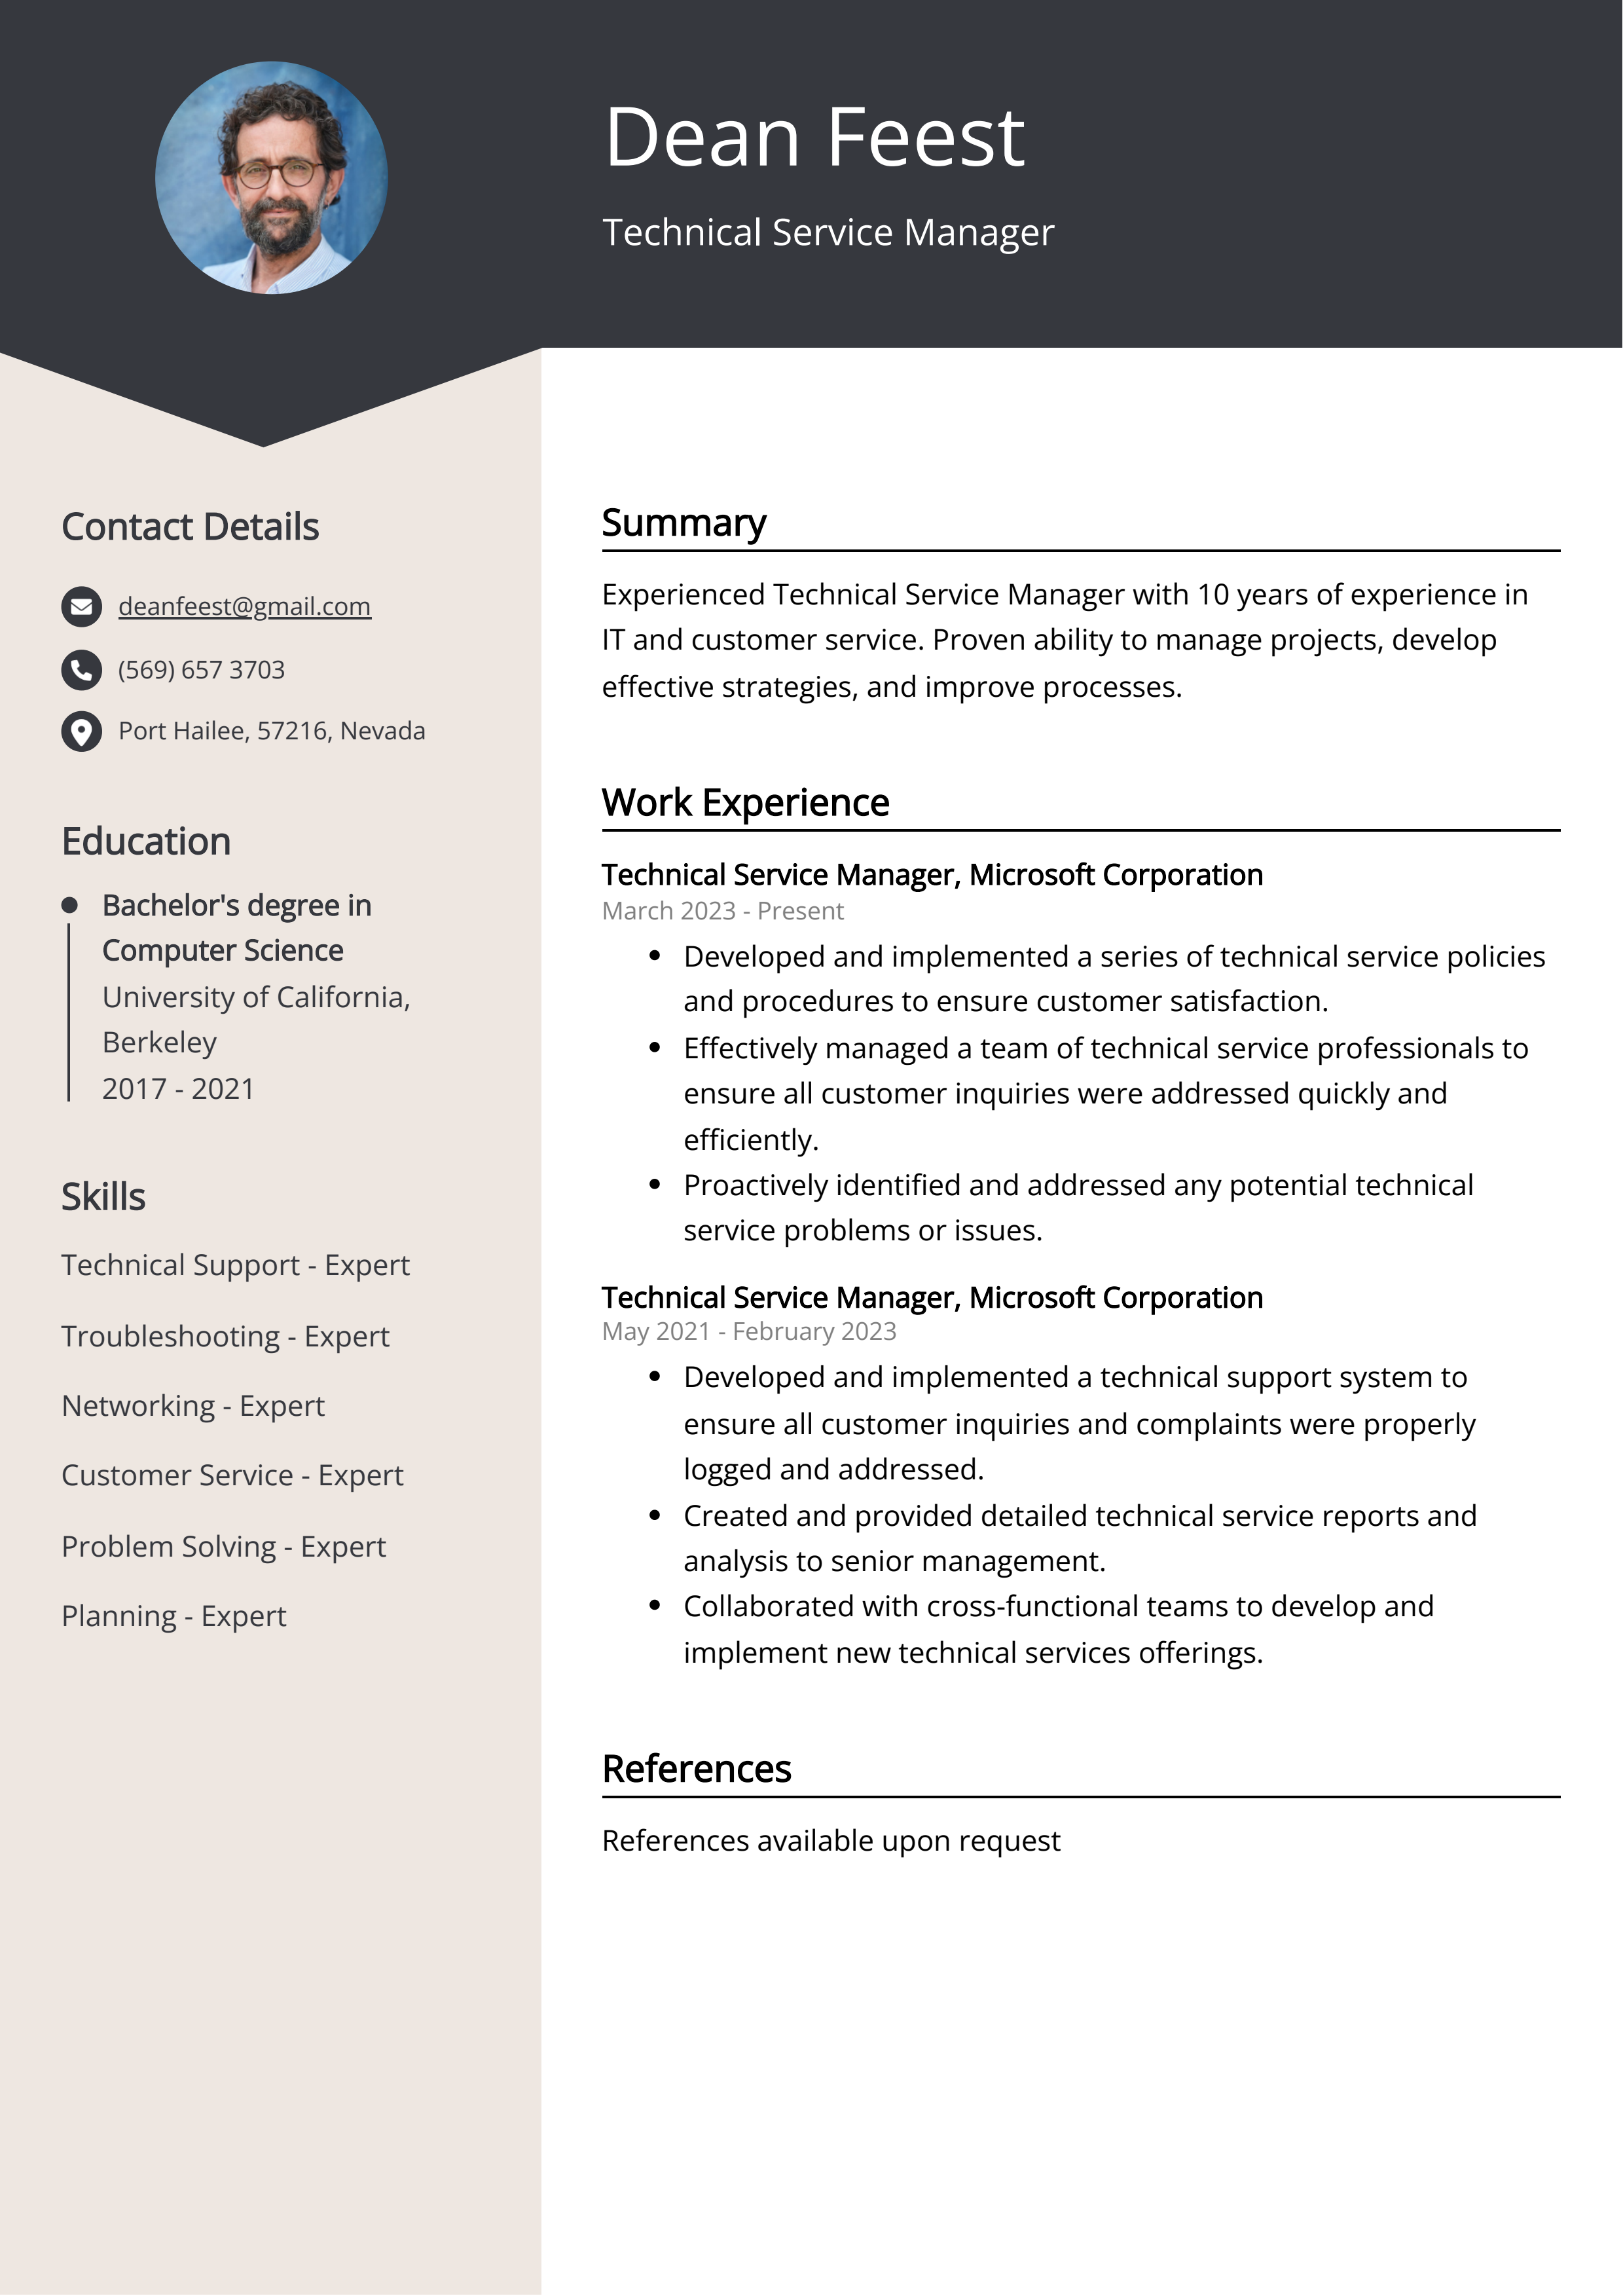 Technical Service Manager CV Example